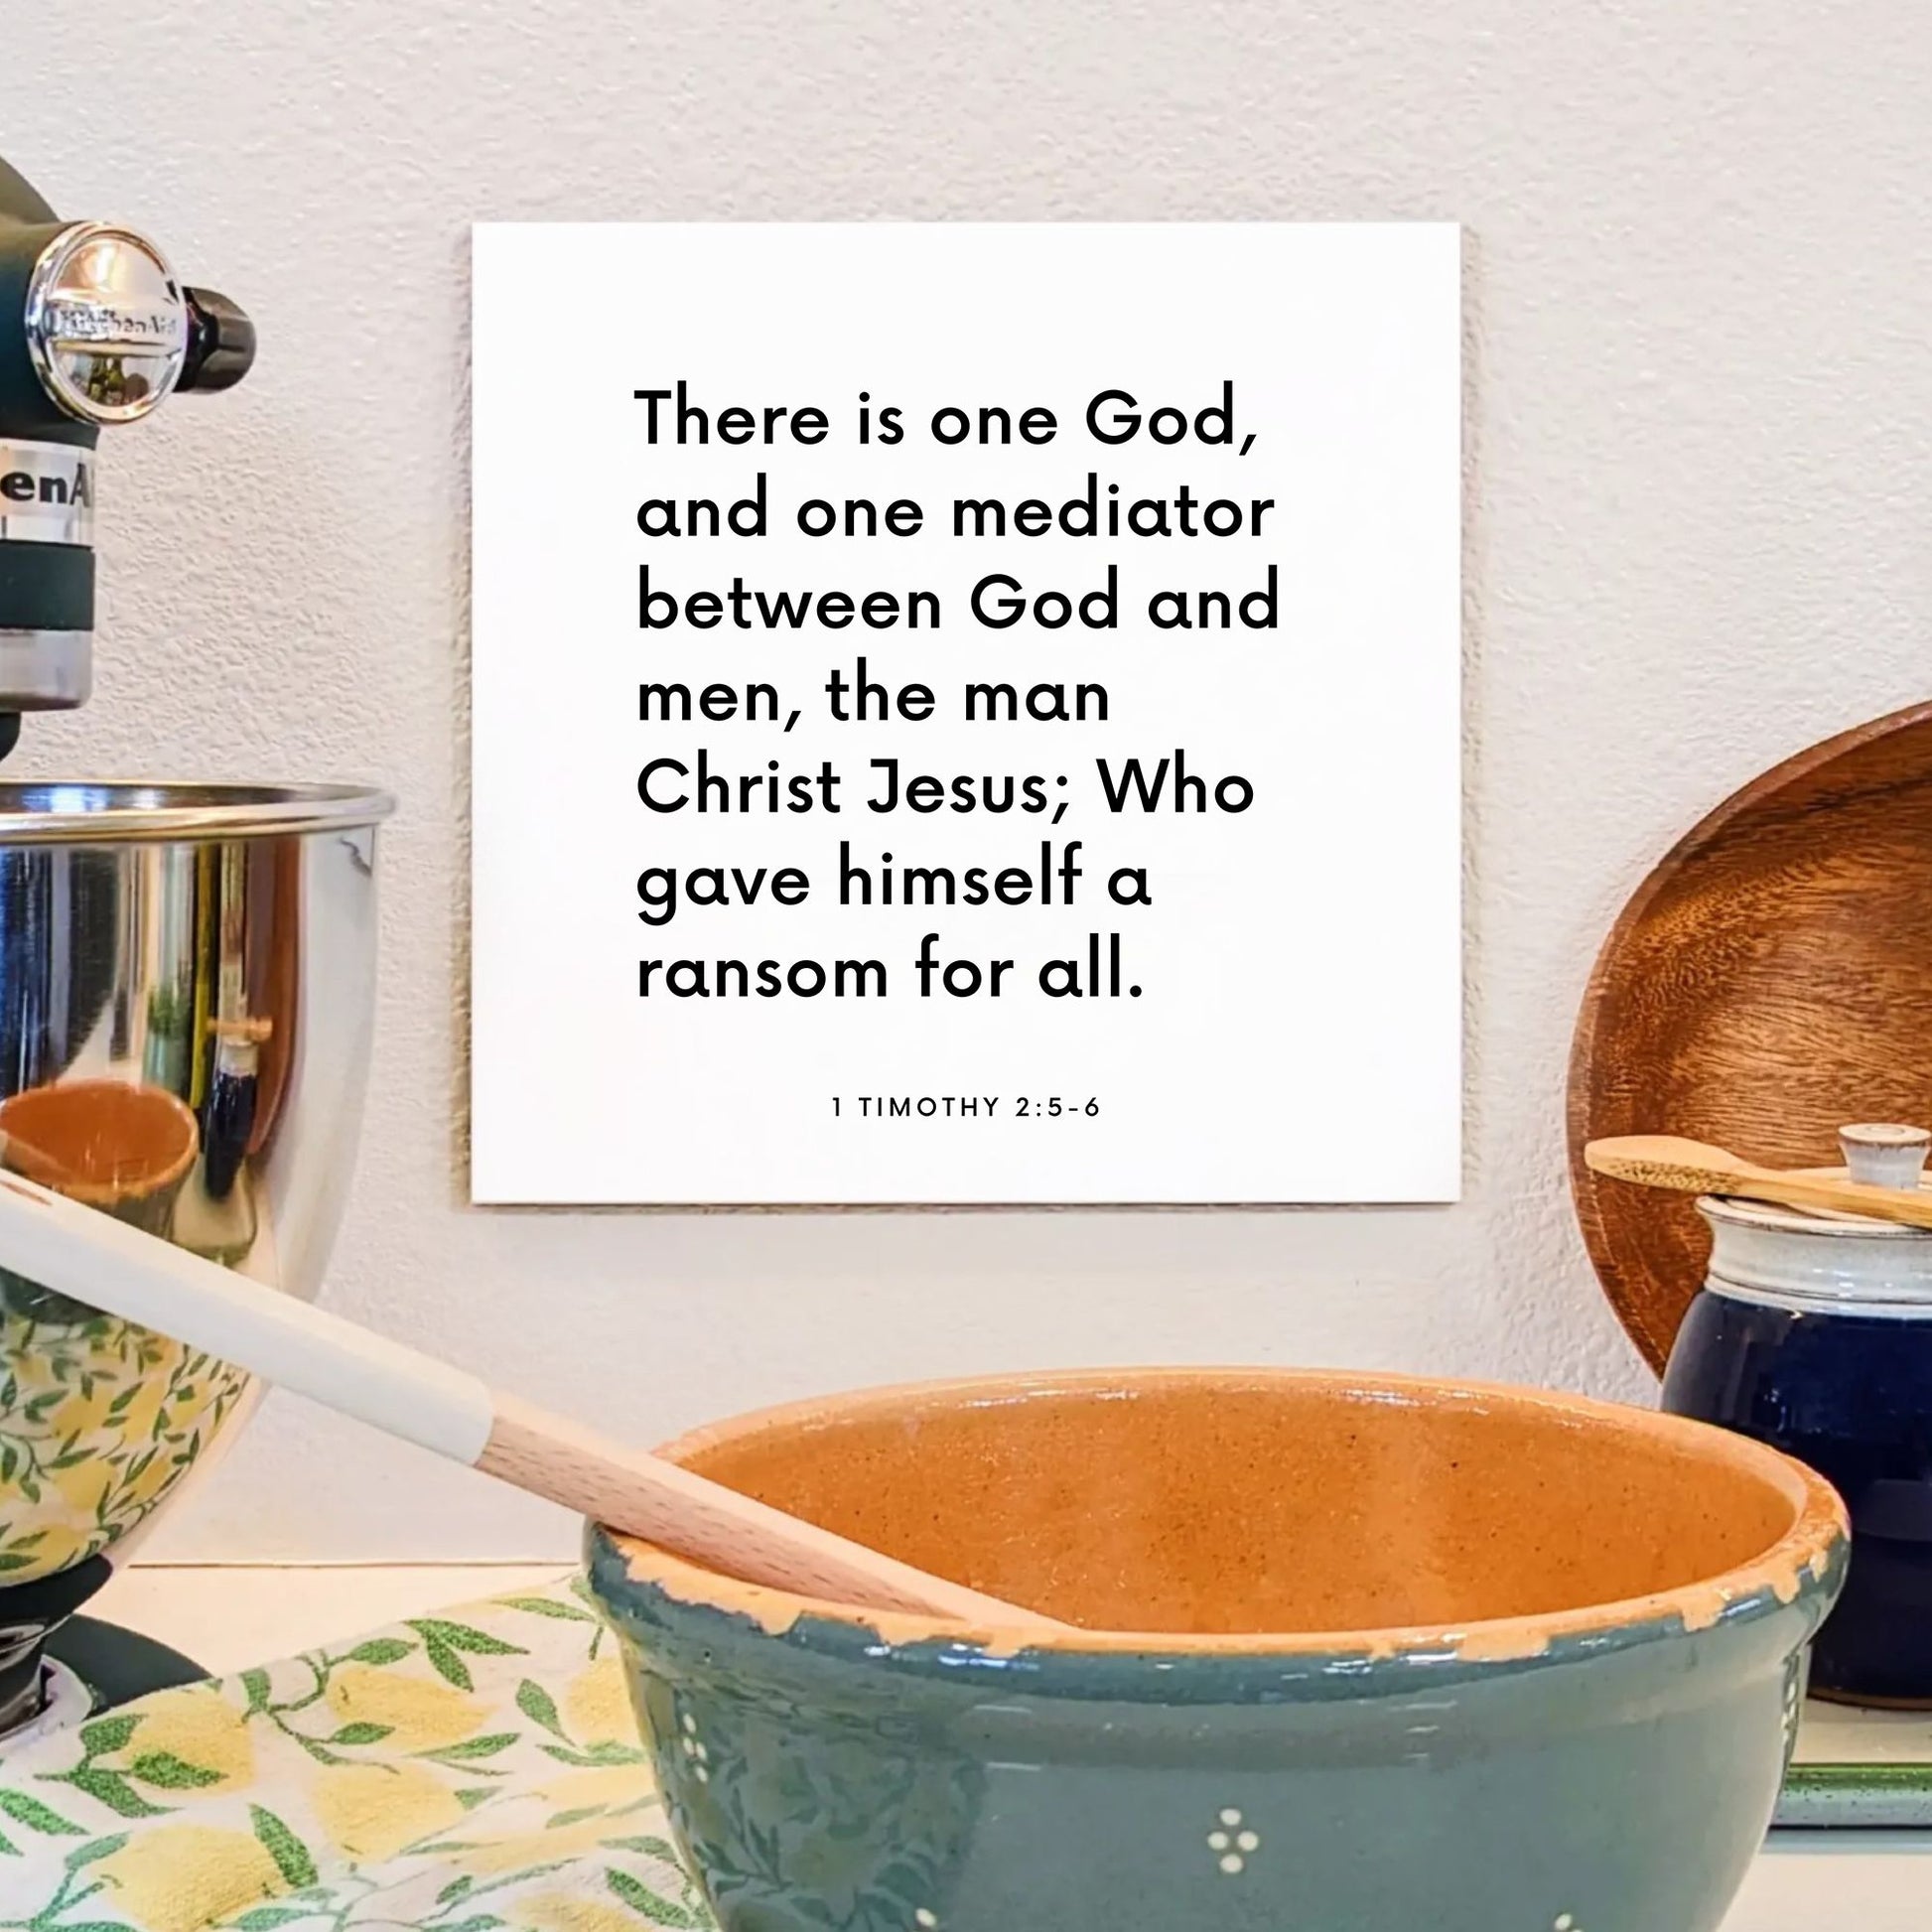 Kitchen mouting of the scripture tile for 1 Timothy 2:5-6 - "There is one God, and one mediator between God and men"